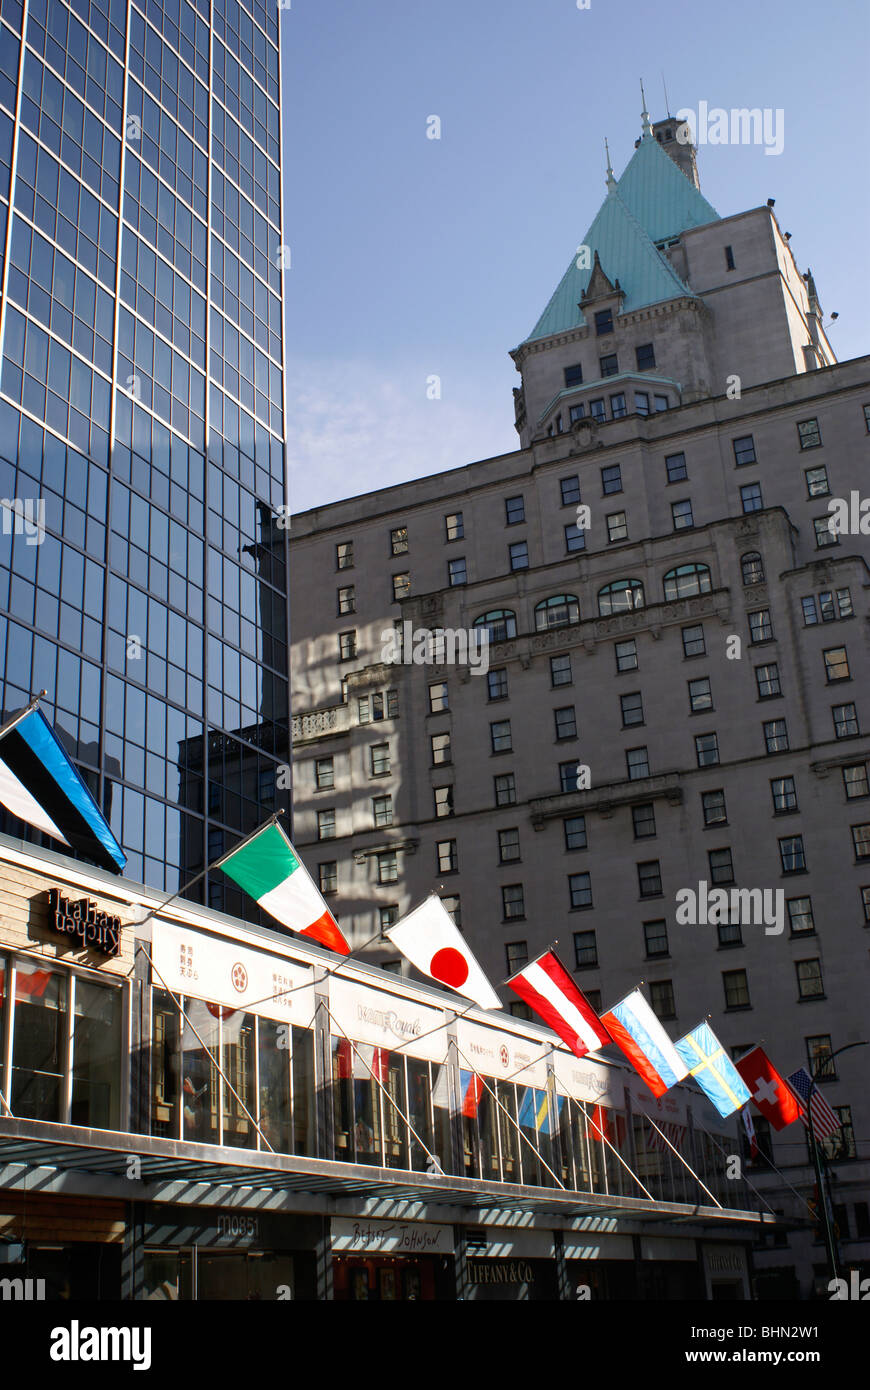 Flags from various nations outside a building during the 2010 Winter Games, Vancouver, British Columbia, Canada. Stock Photo